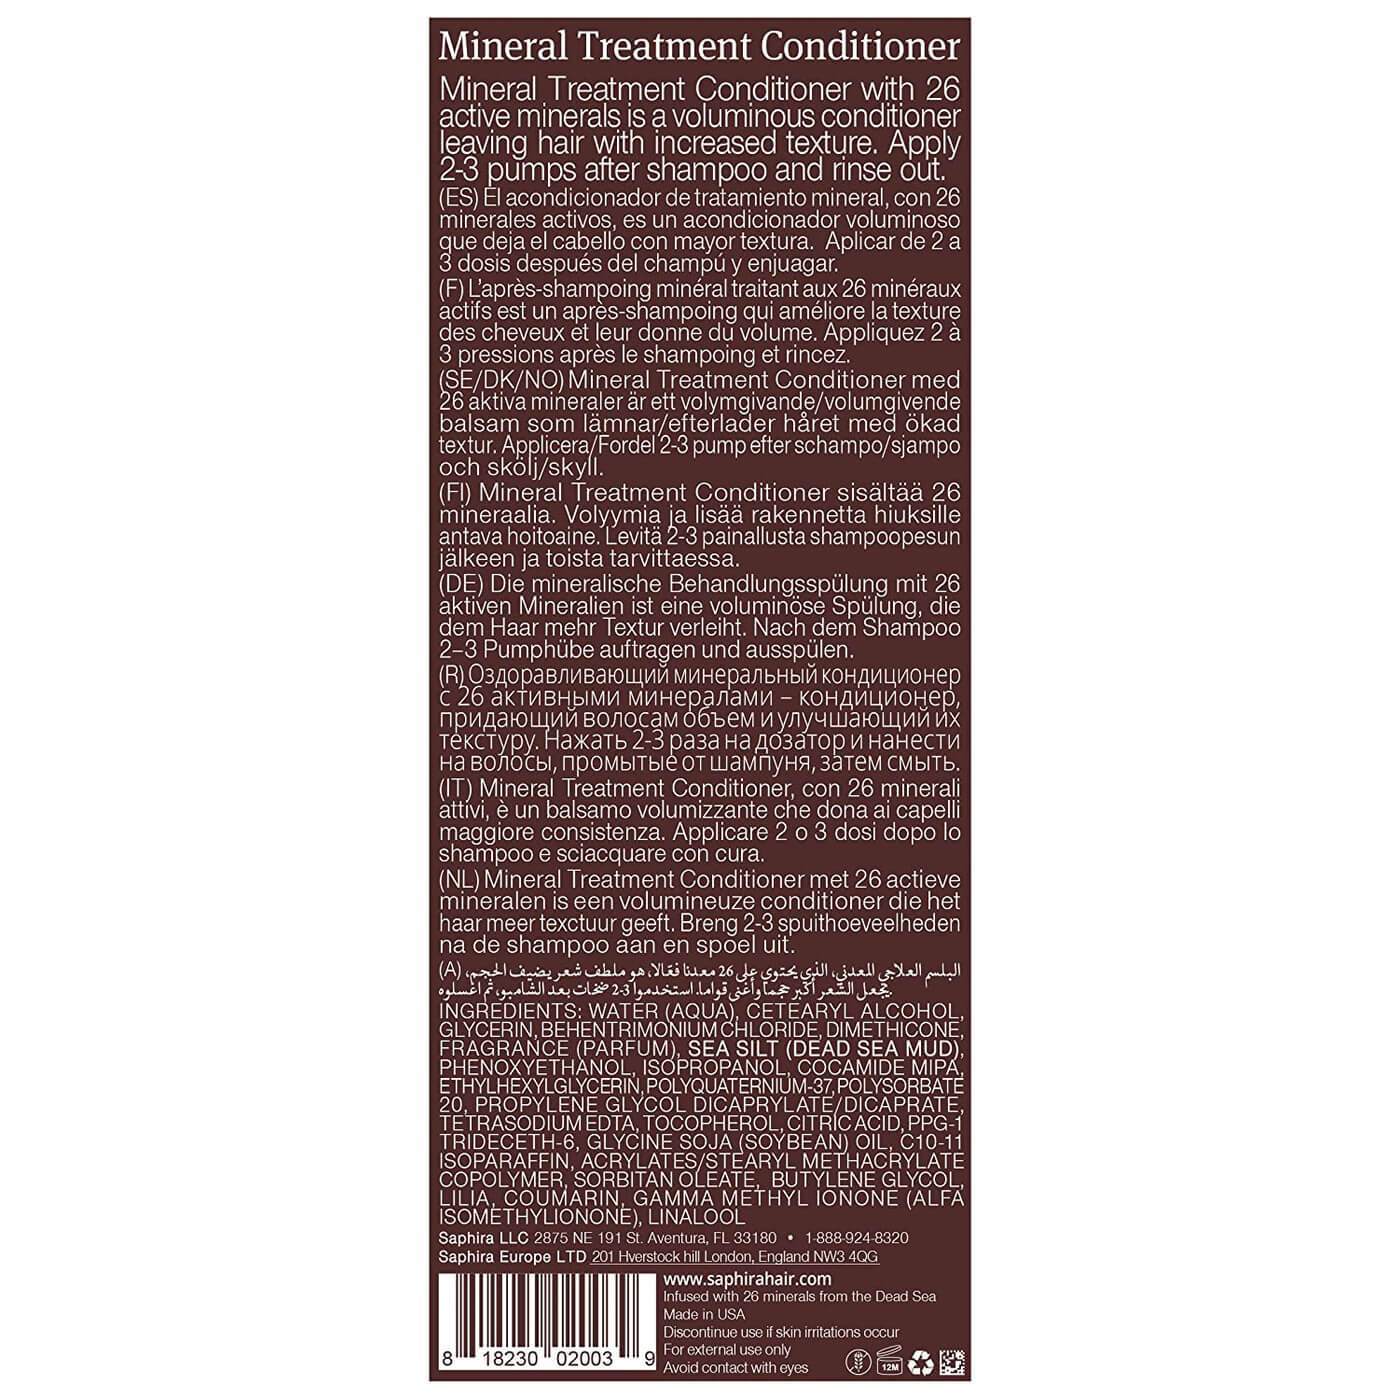 Mineral Treatment Conditioner - Ingredients